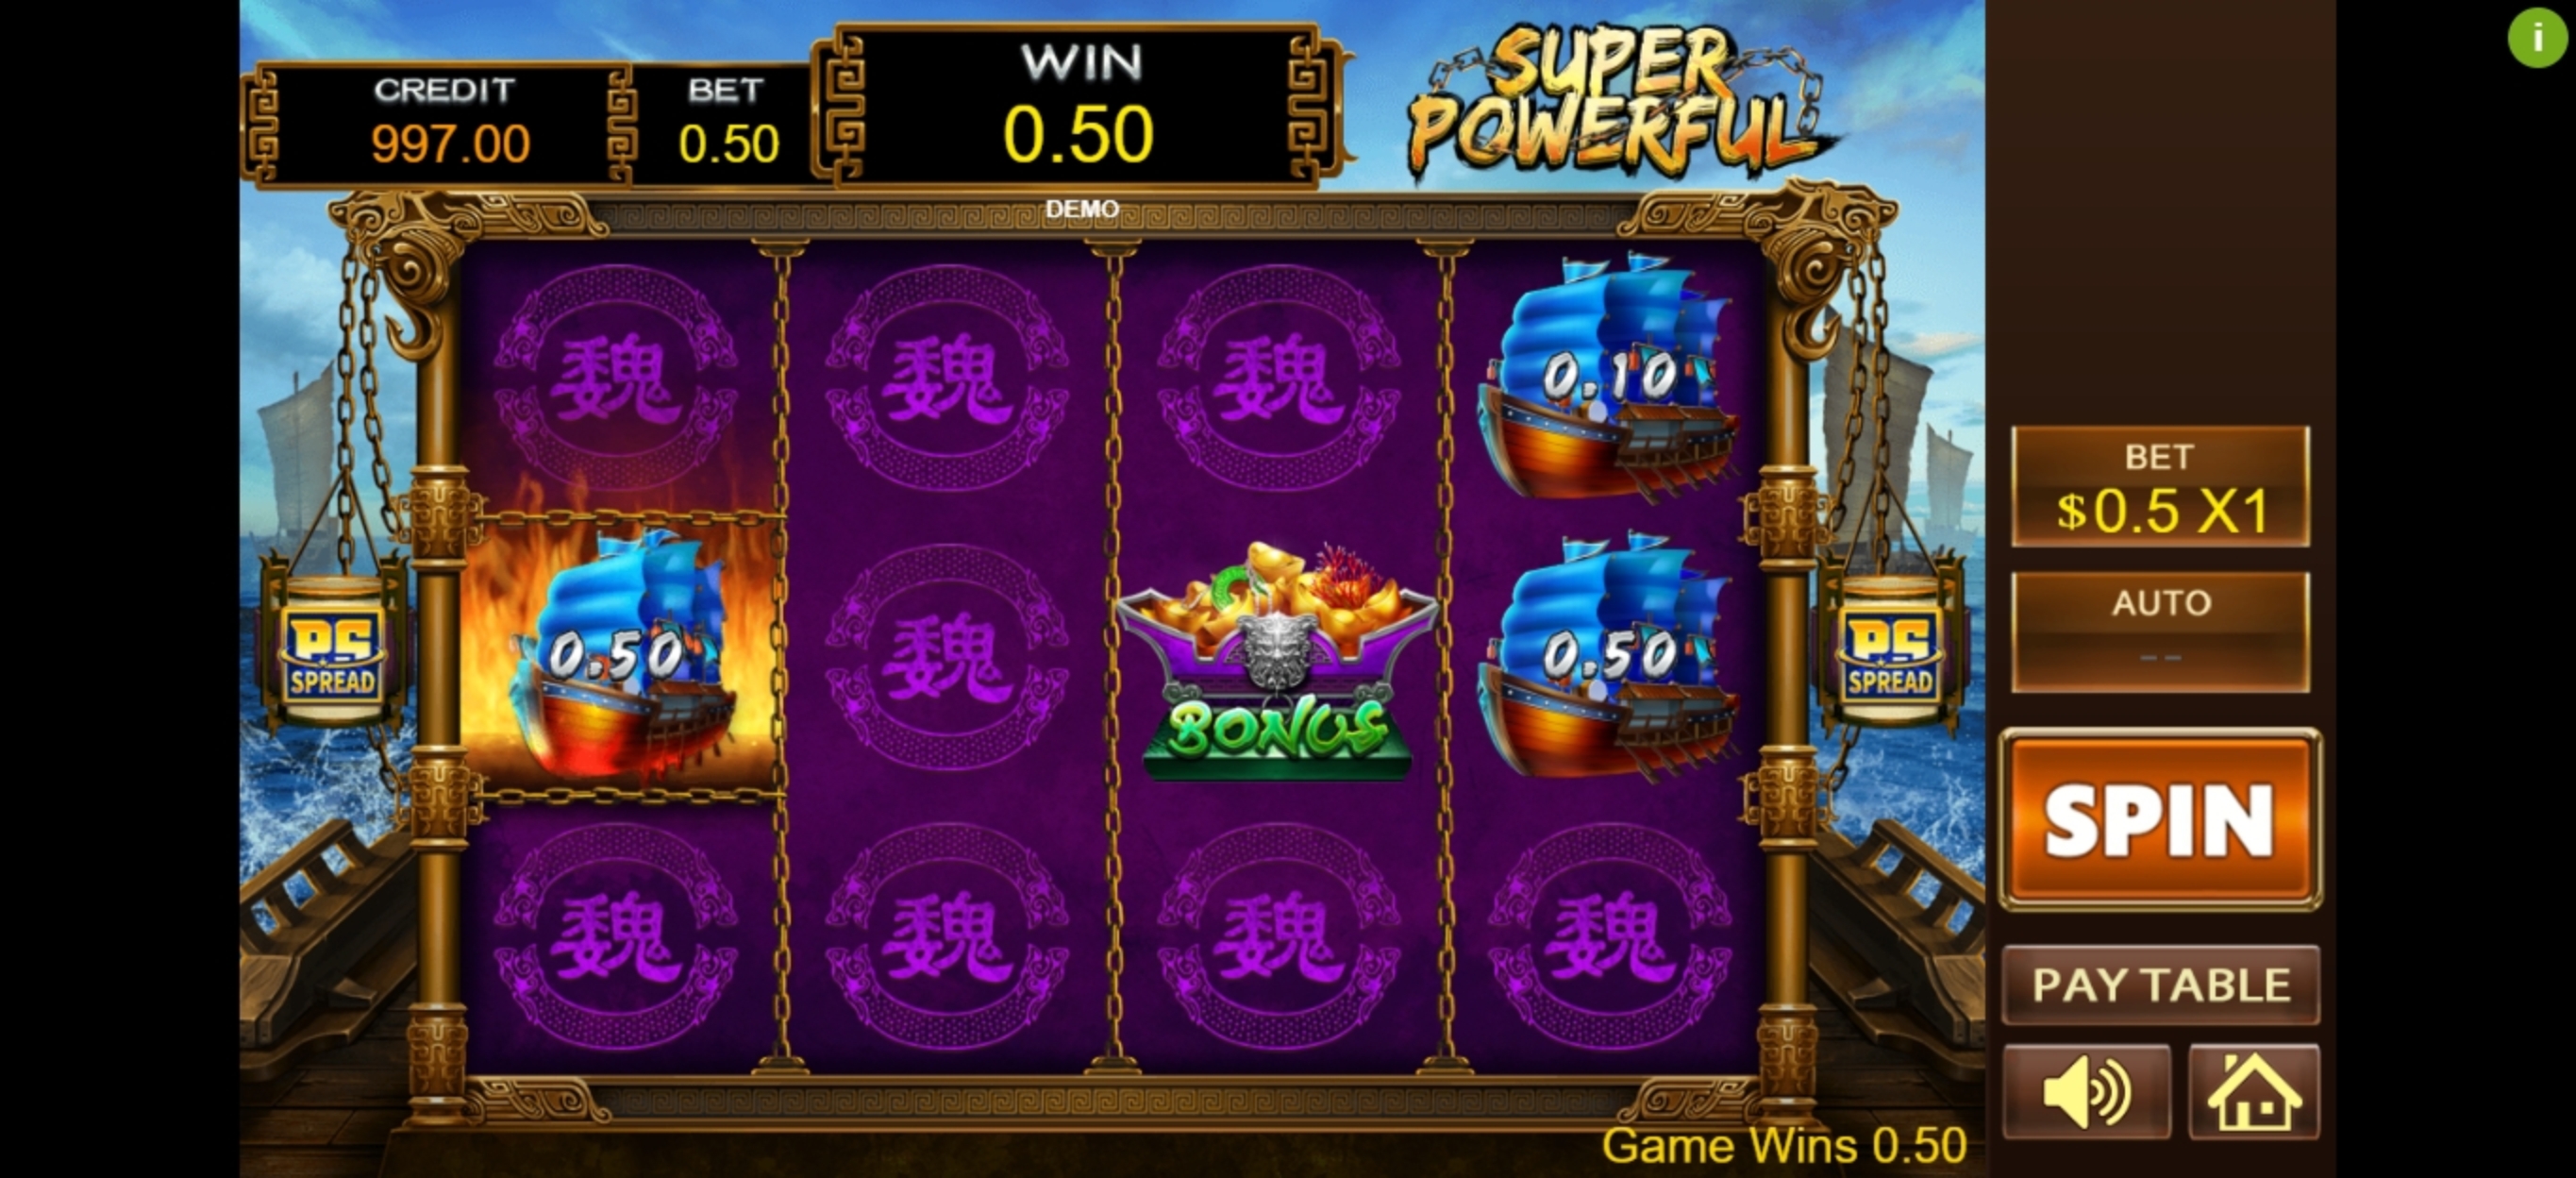 Win Money in Super Powerful Free Slot Game by PlayStar